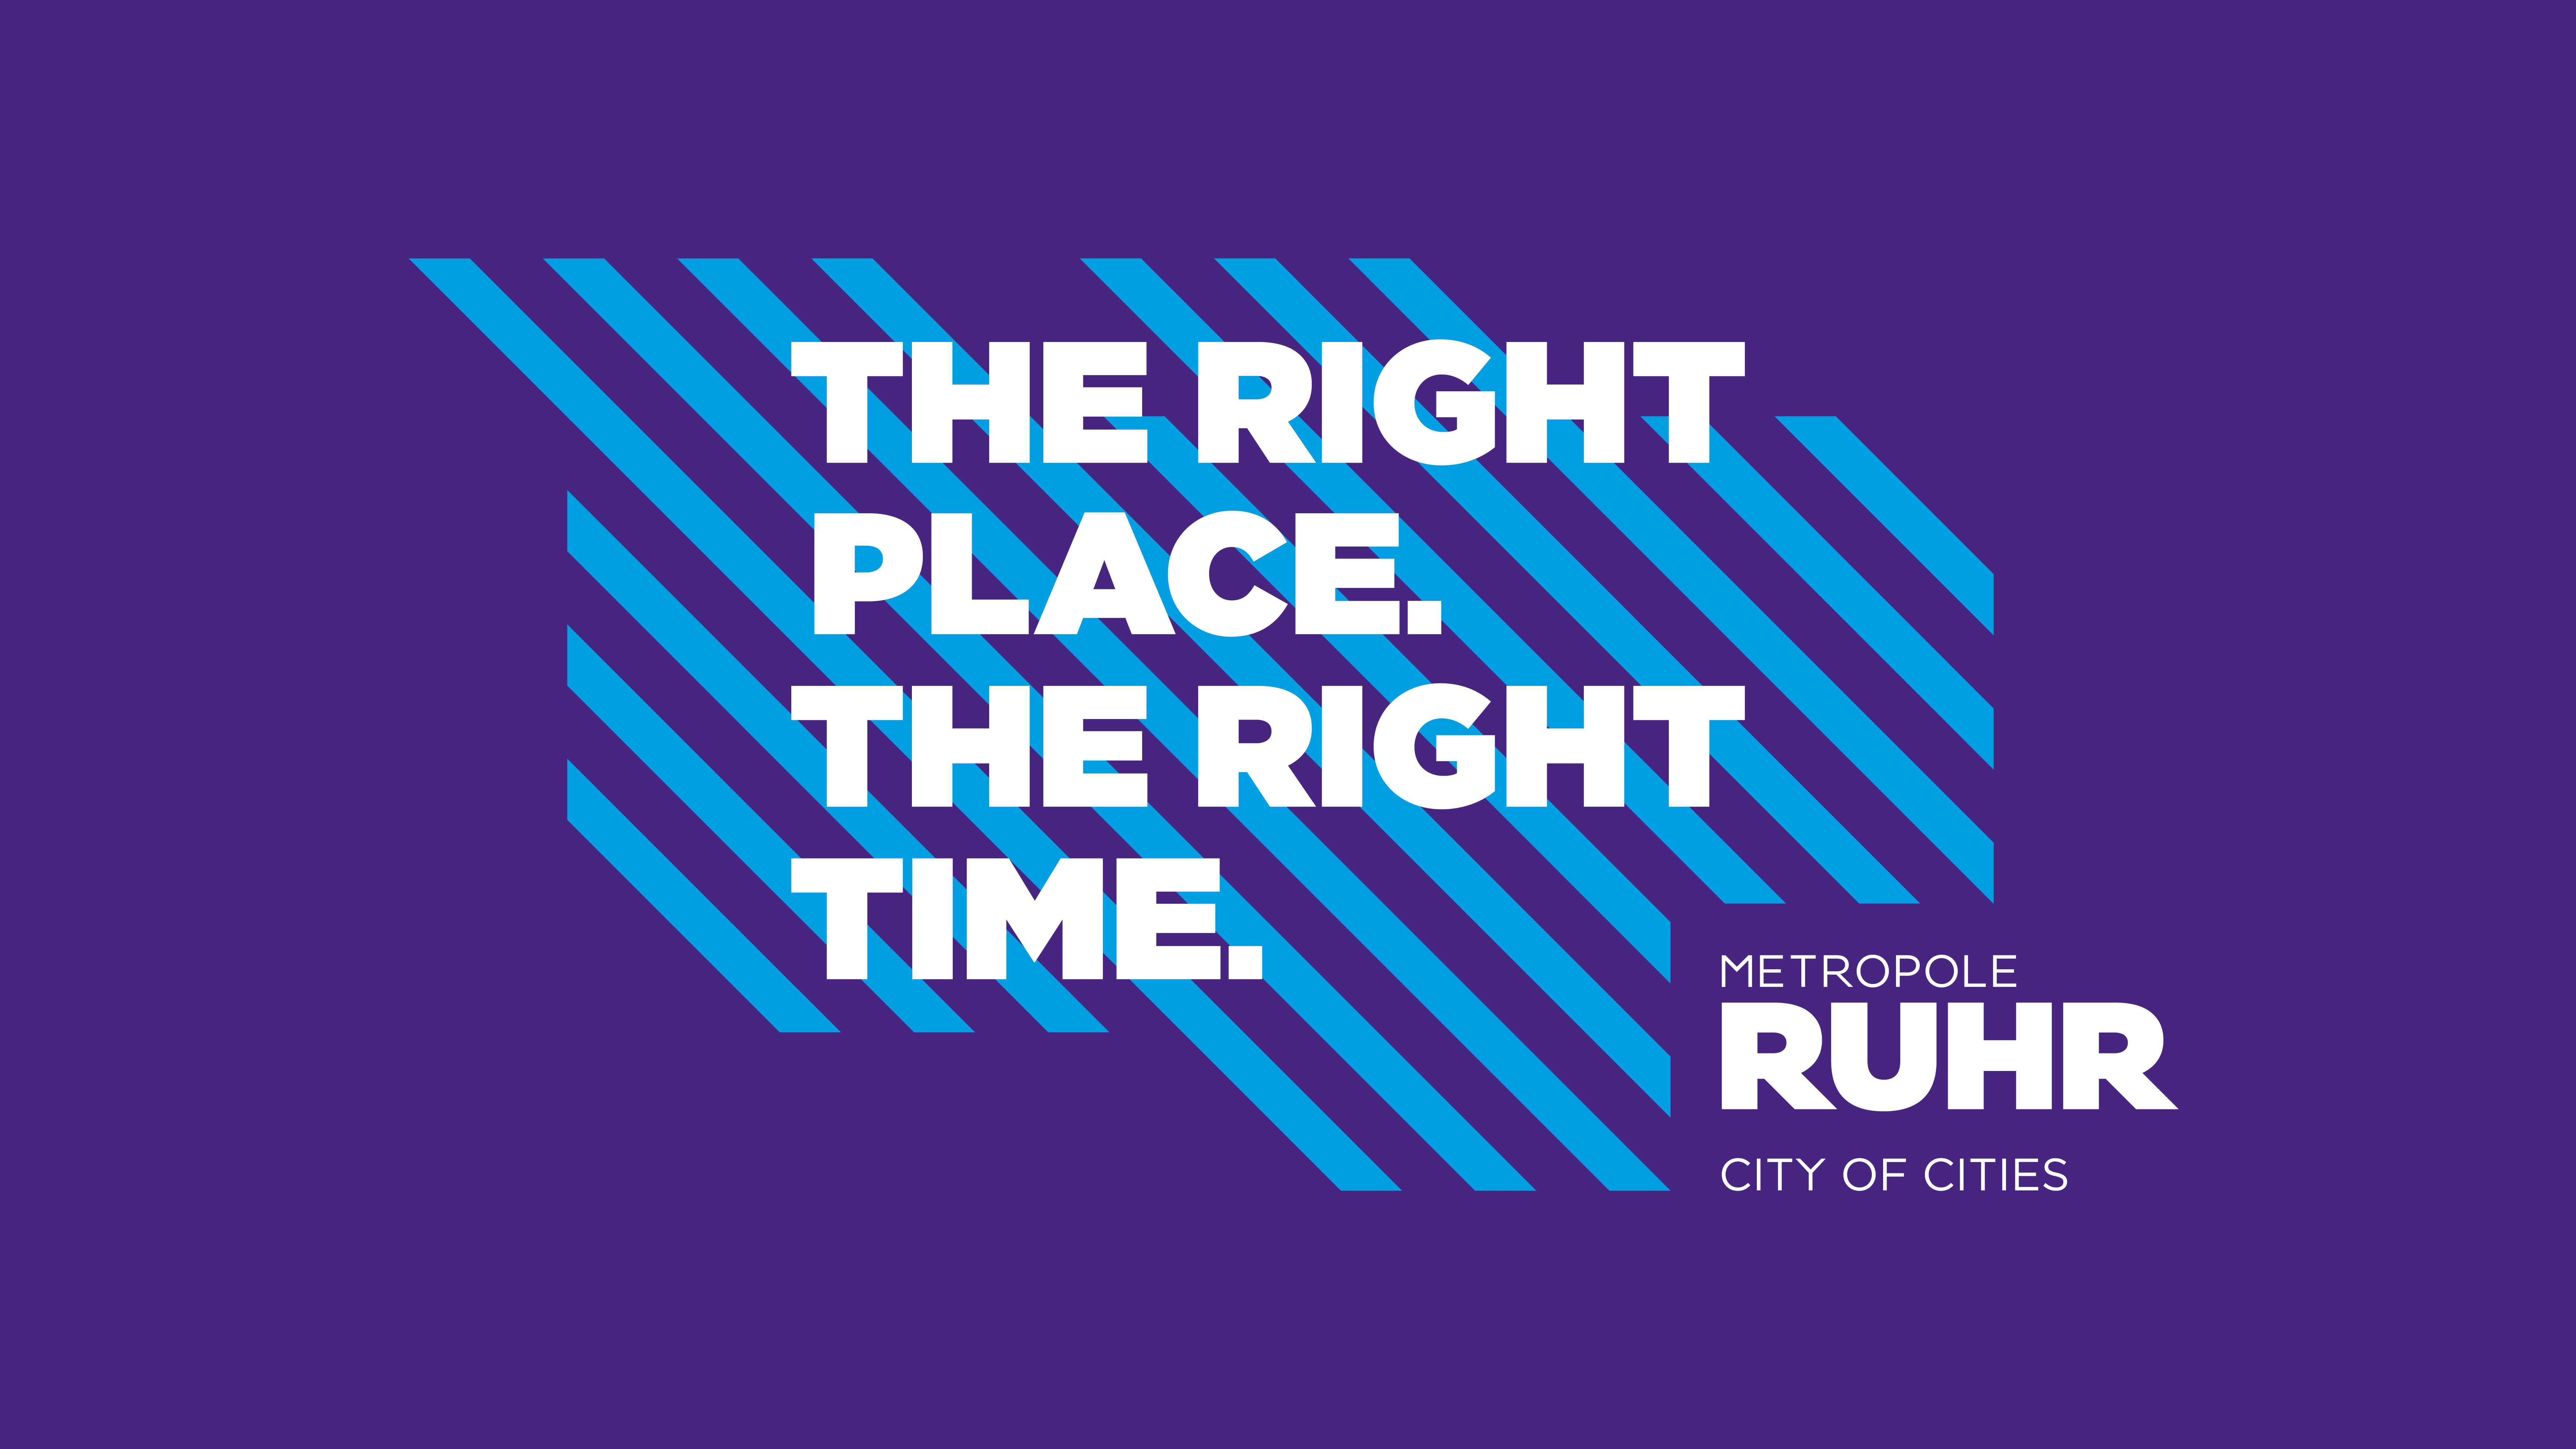 Keyvisual "The right place. The right time." zur Standortmarketing-Kampagne "Stadt der Städte", 2020.